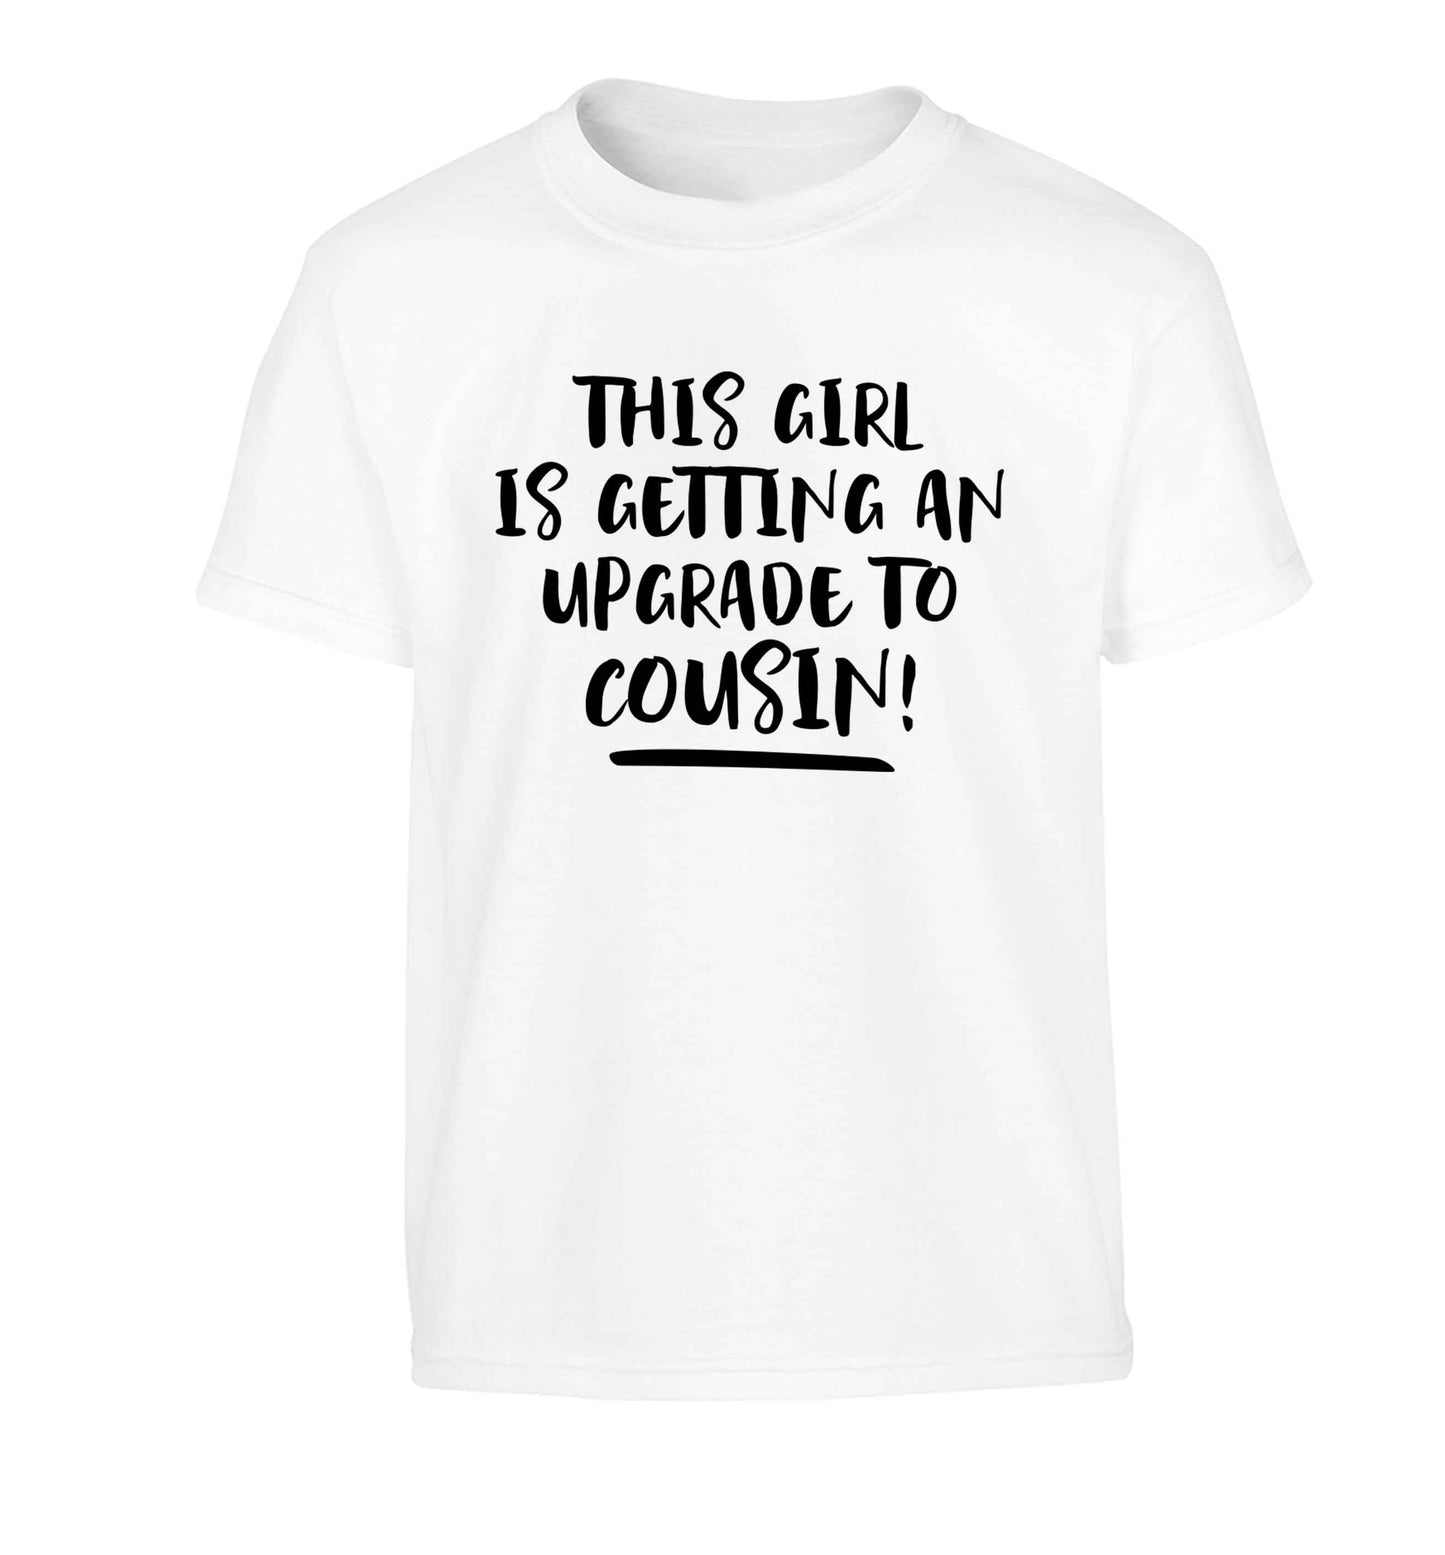 This girl is getting an upgrade to cousin! Children's white Tshirt 12-13 Years